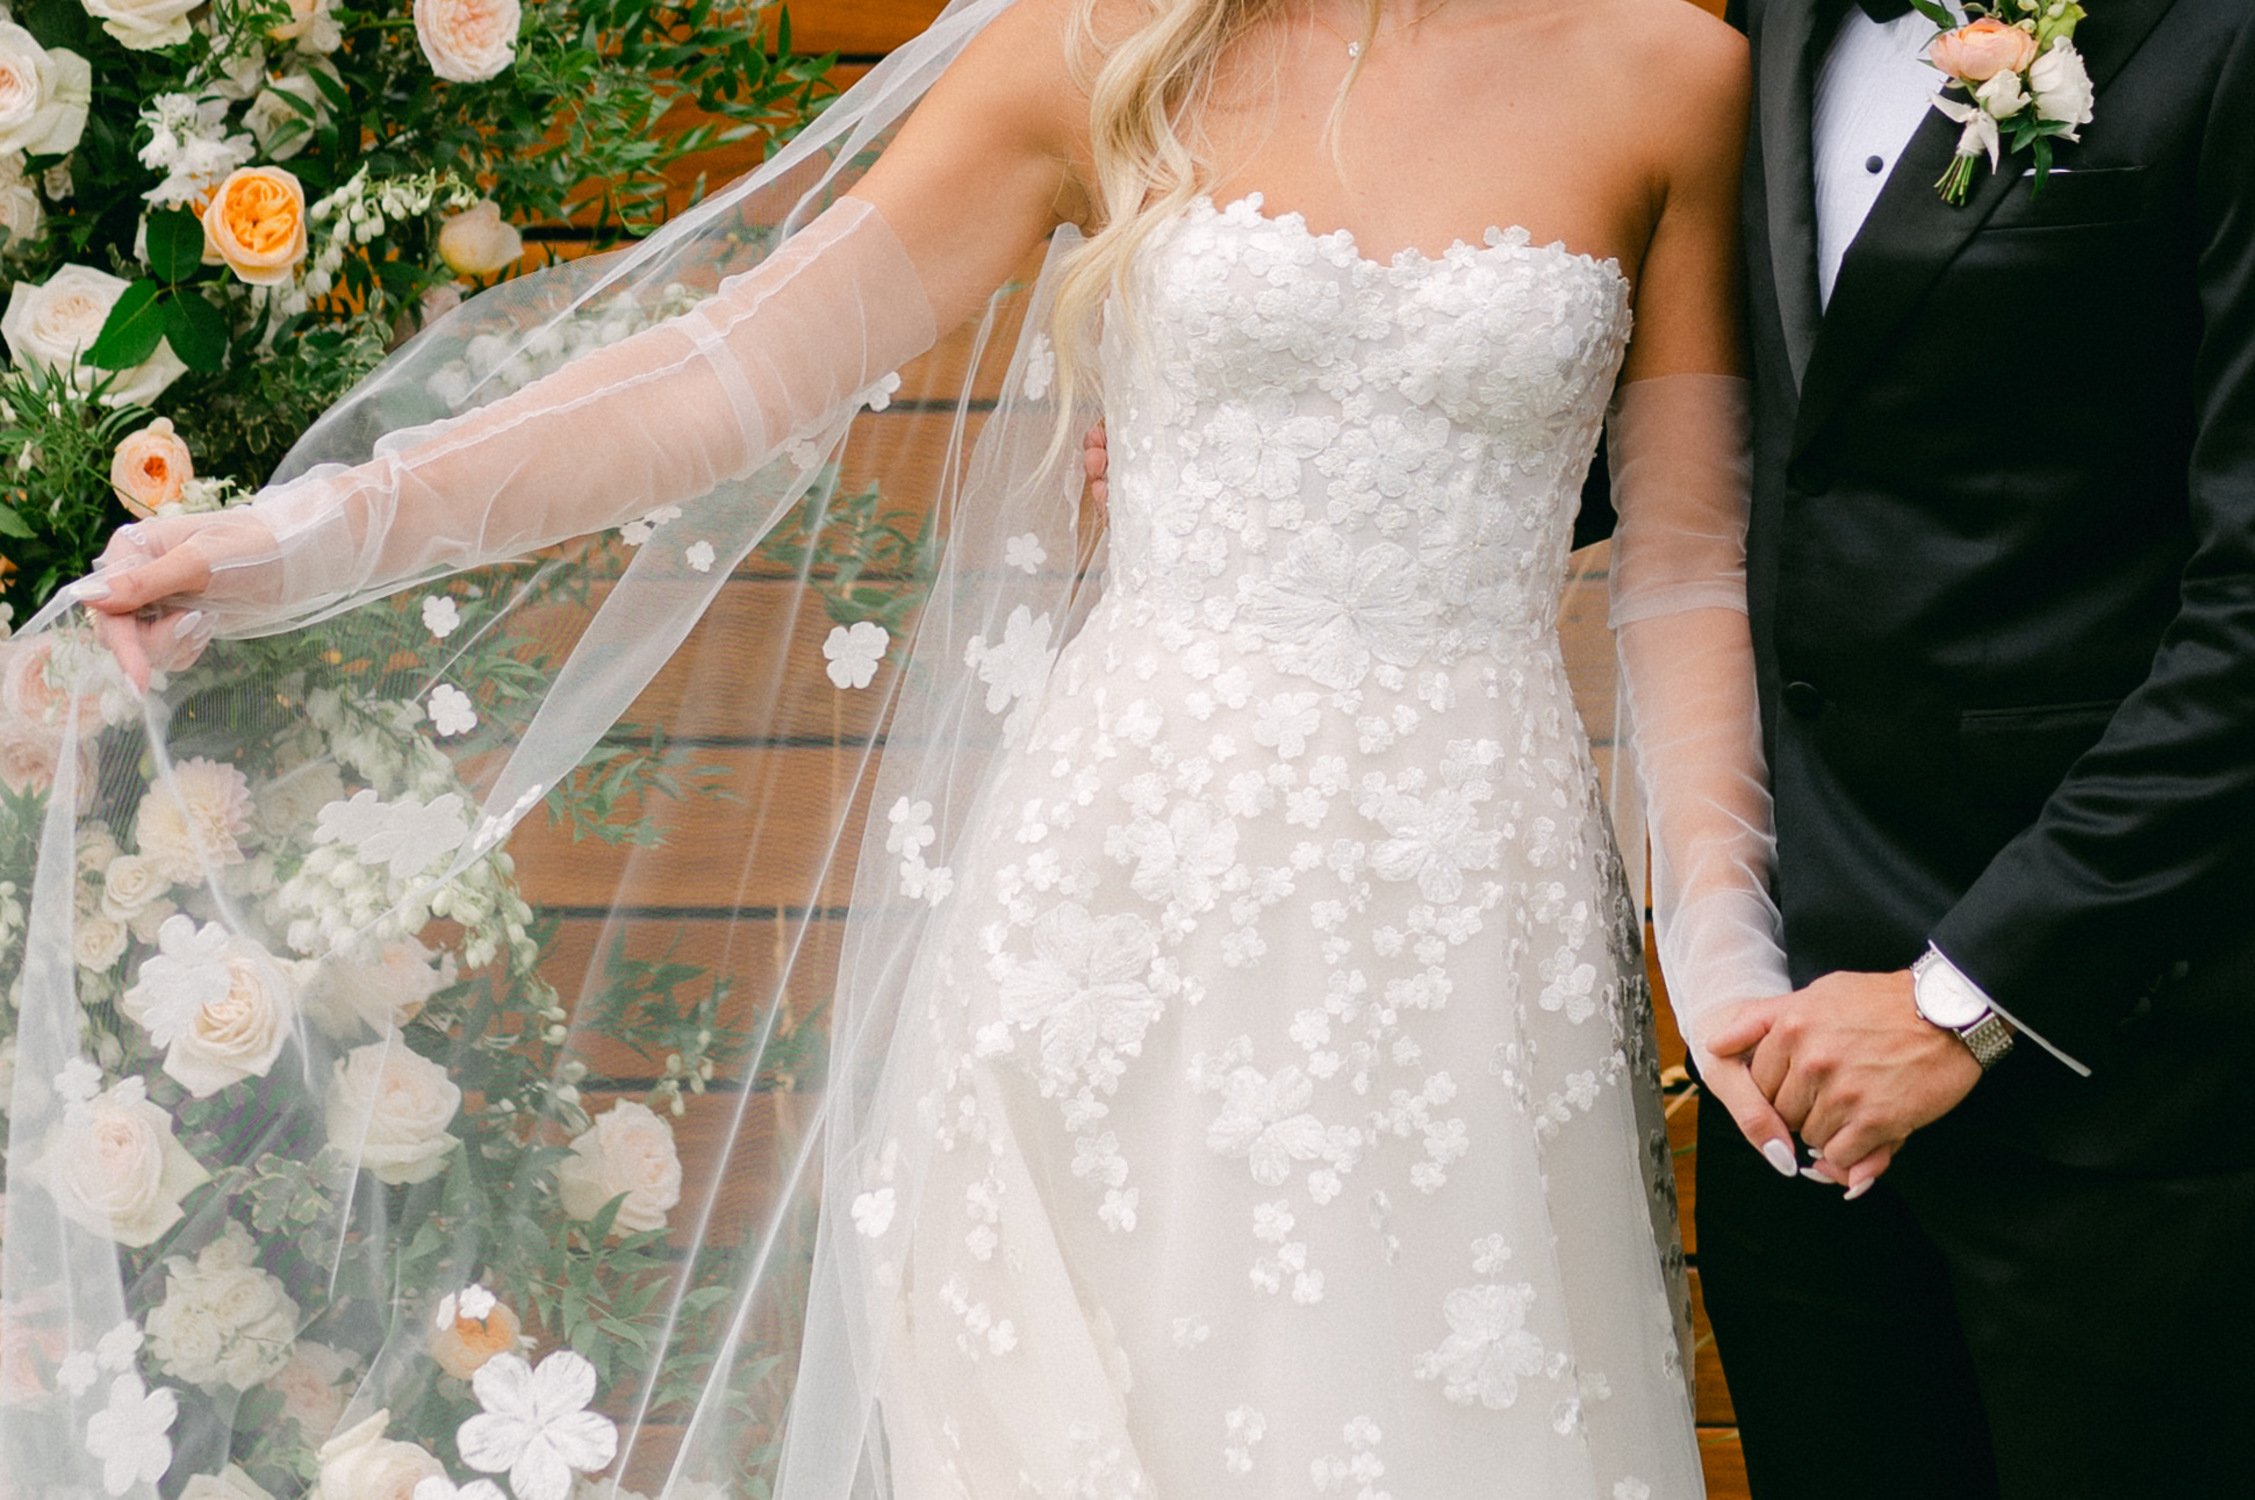 Elm Estate Wedding photos, photo of the bride's wedding dress with floral details and her veil with intricate floral designs and the groom in his black classic suit